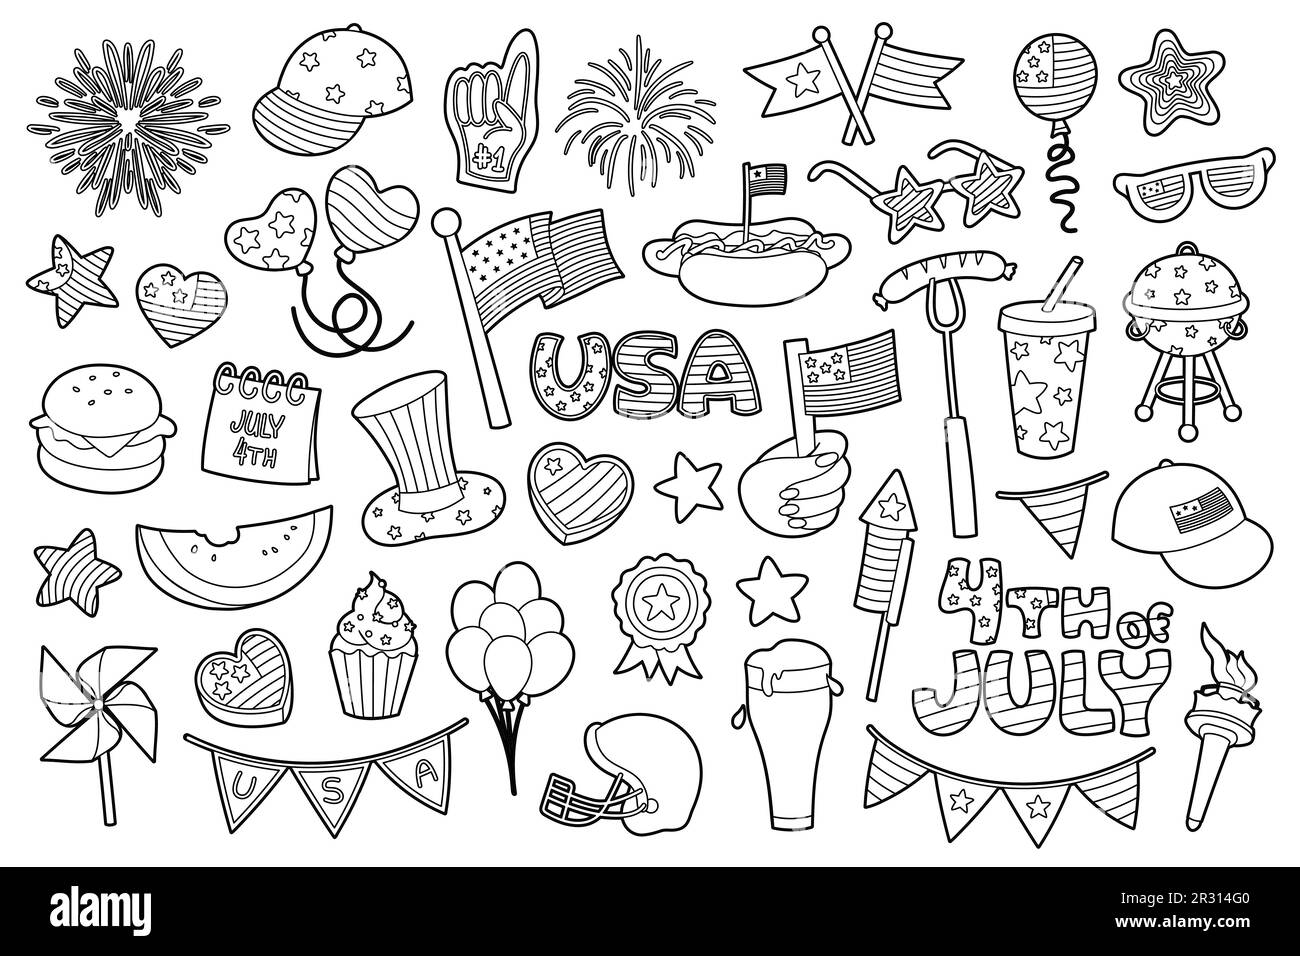 4th of July, Independence Day of United States of America celebration themed illustrations, hand drawn vector elements and objects. black and white. Stock Vector